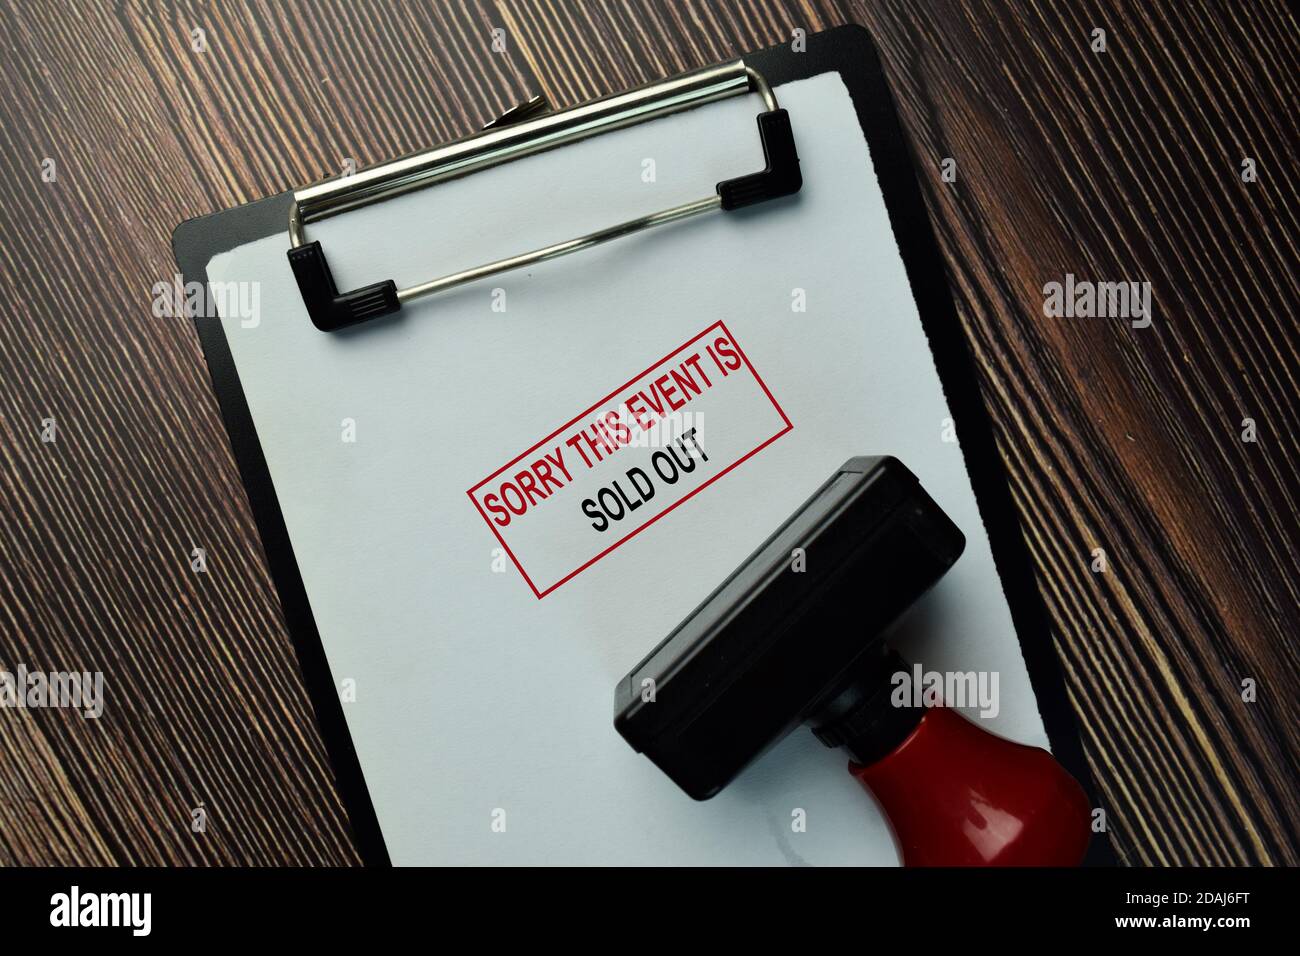 Sorry This Event Is Sold Out write on a book isolated on Wooden Table. Stock Photo